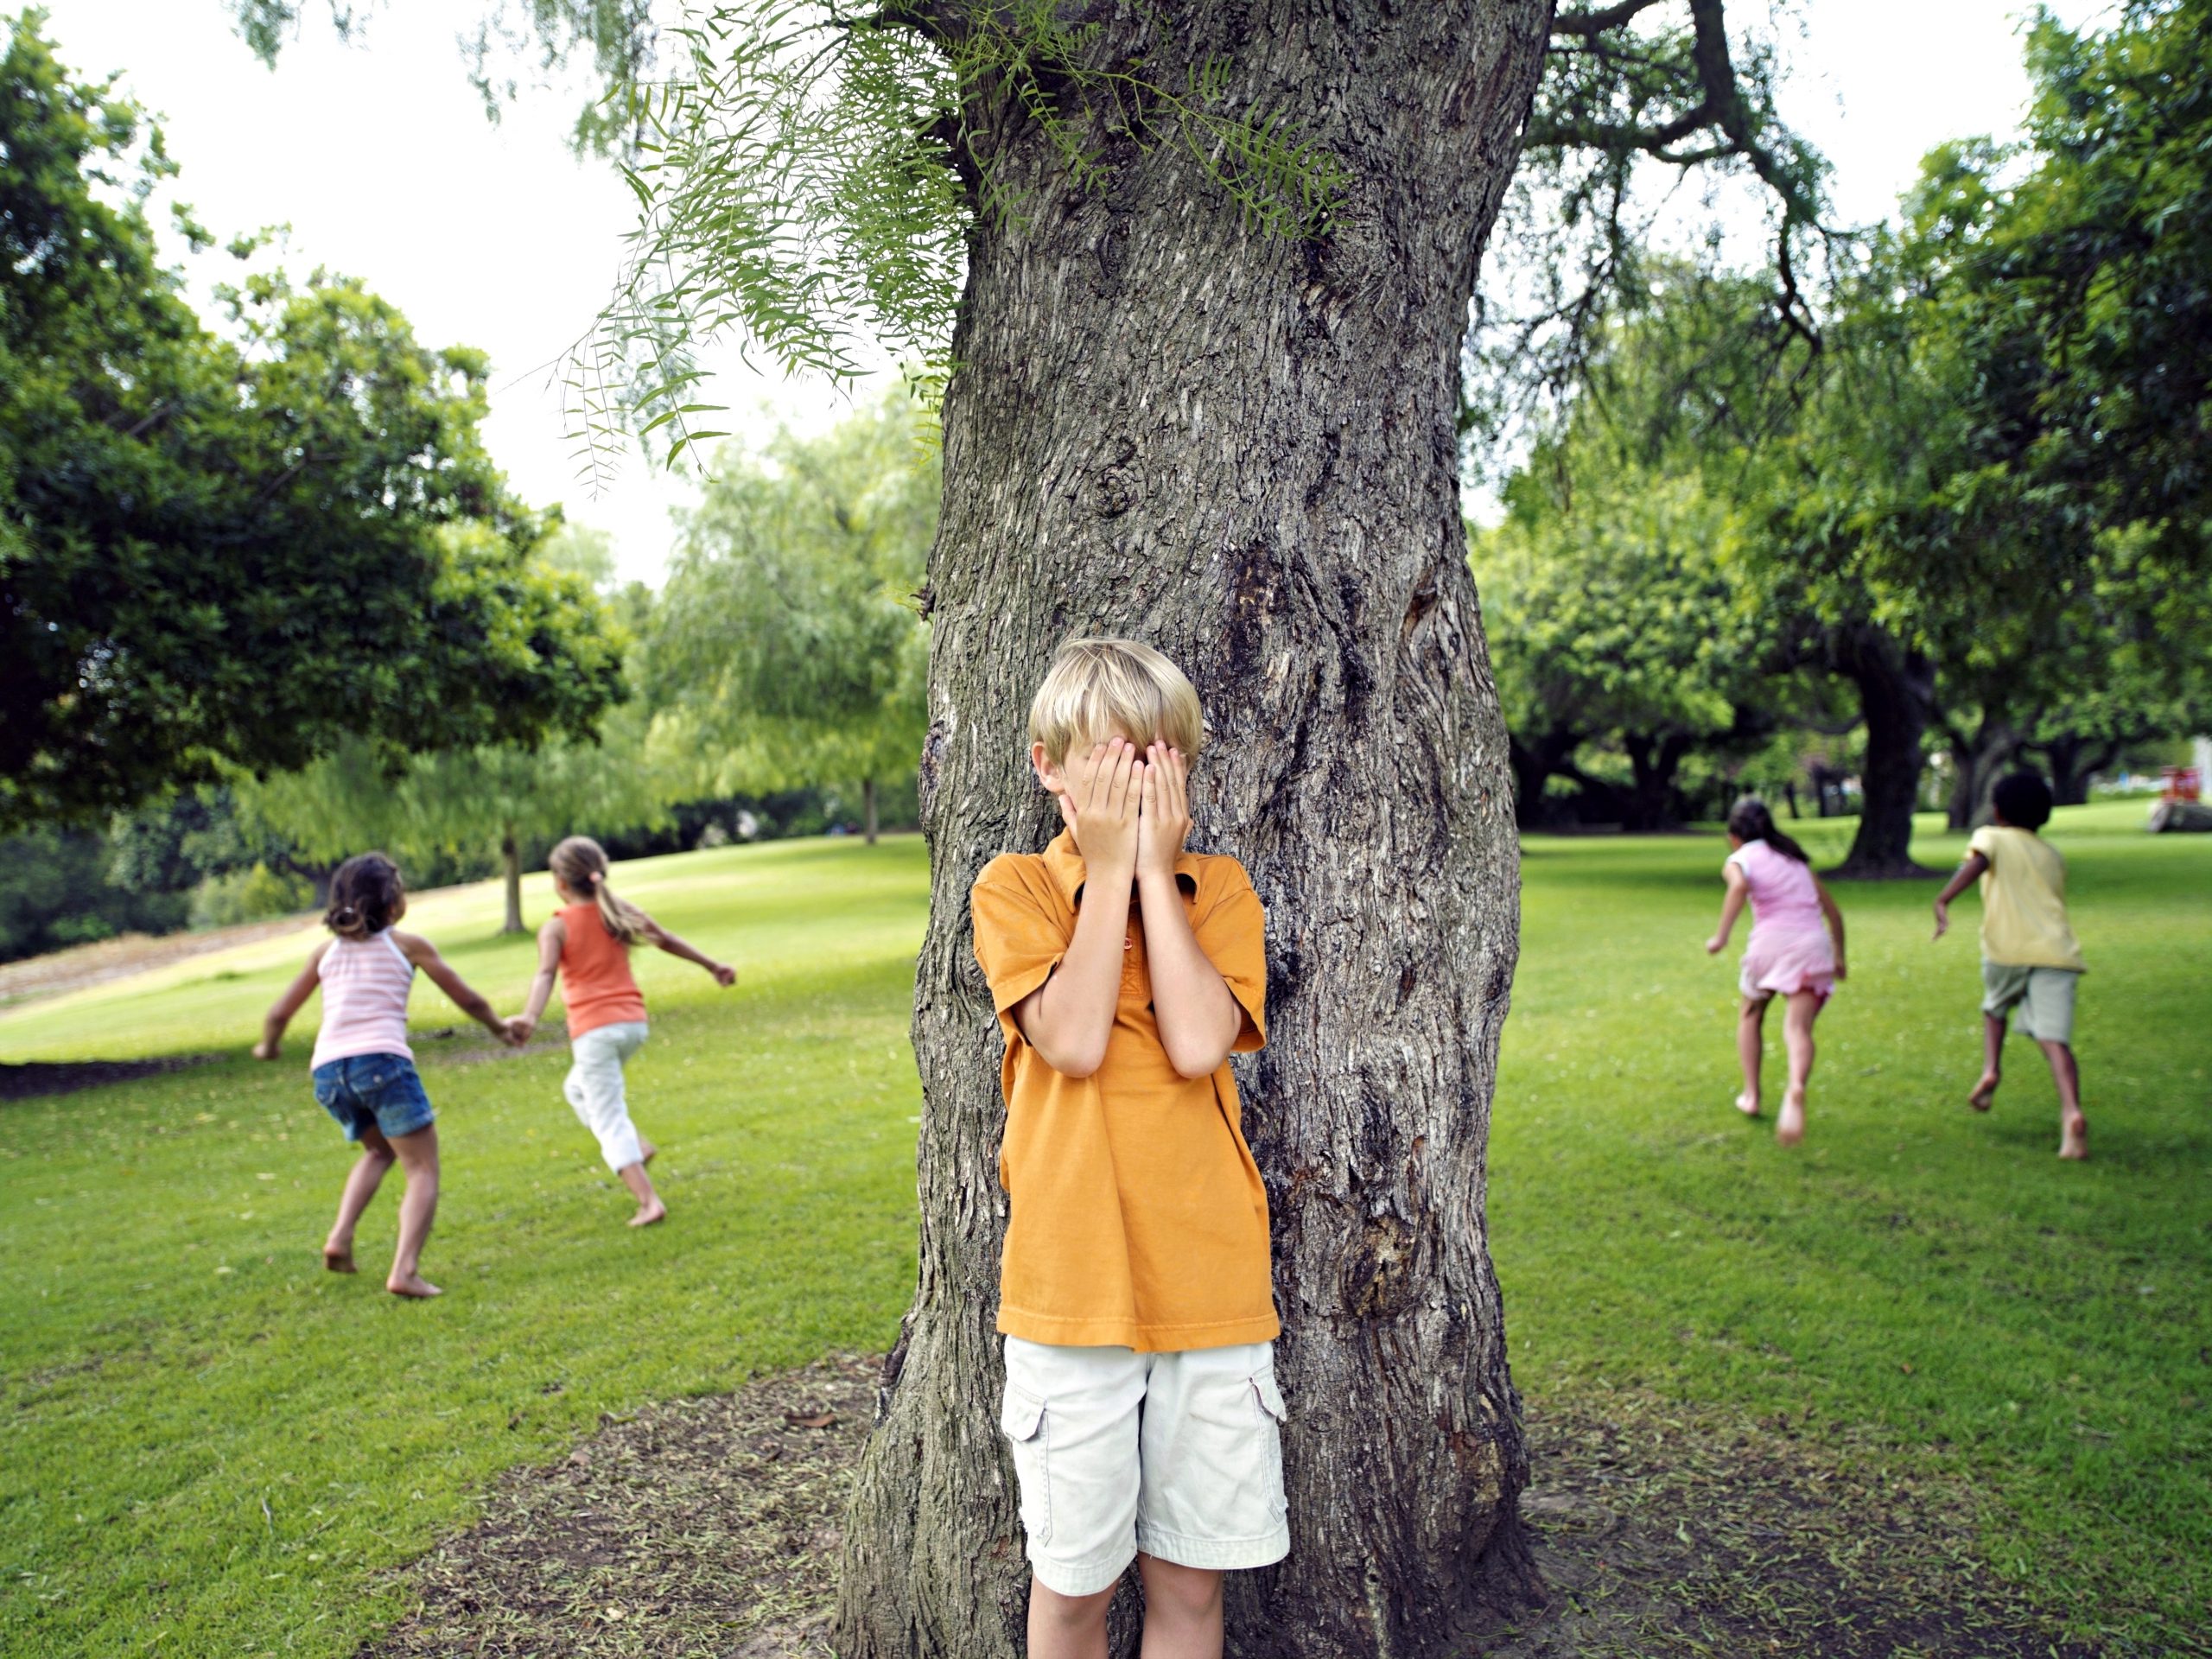 Boy (7-9) with hands covering eyes playing hide and seek in park, hiding from friends behind tree